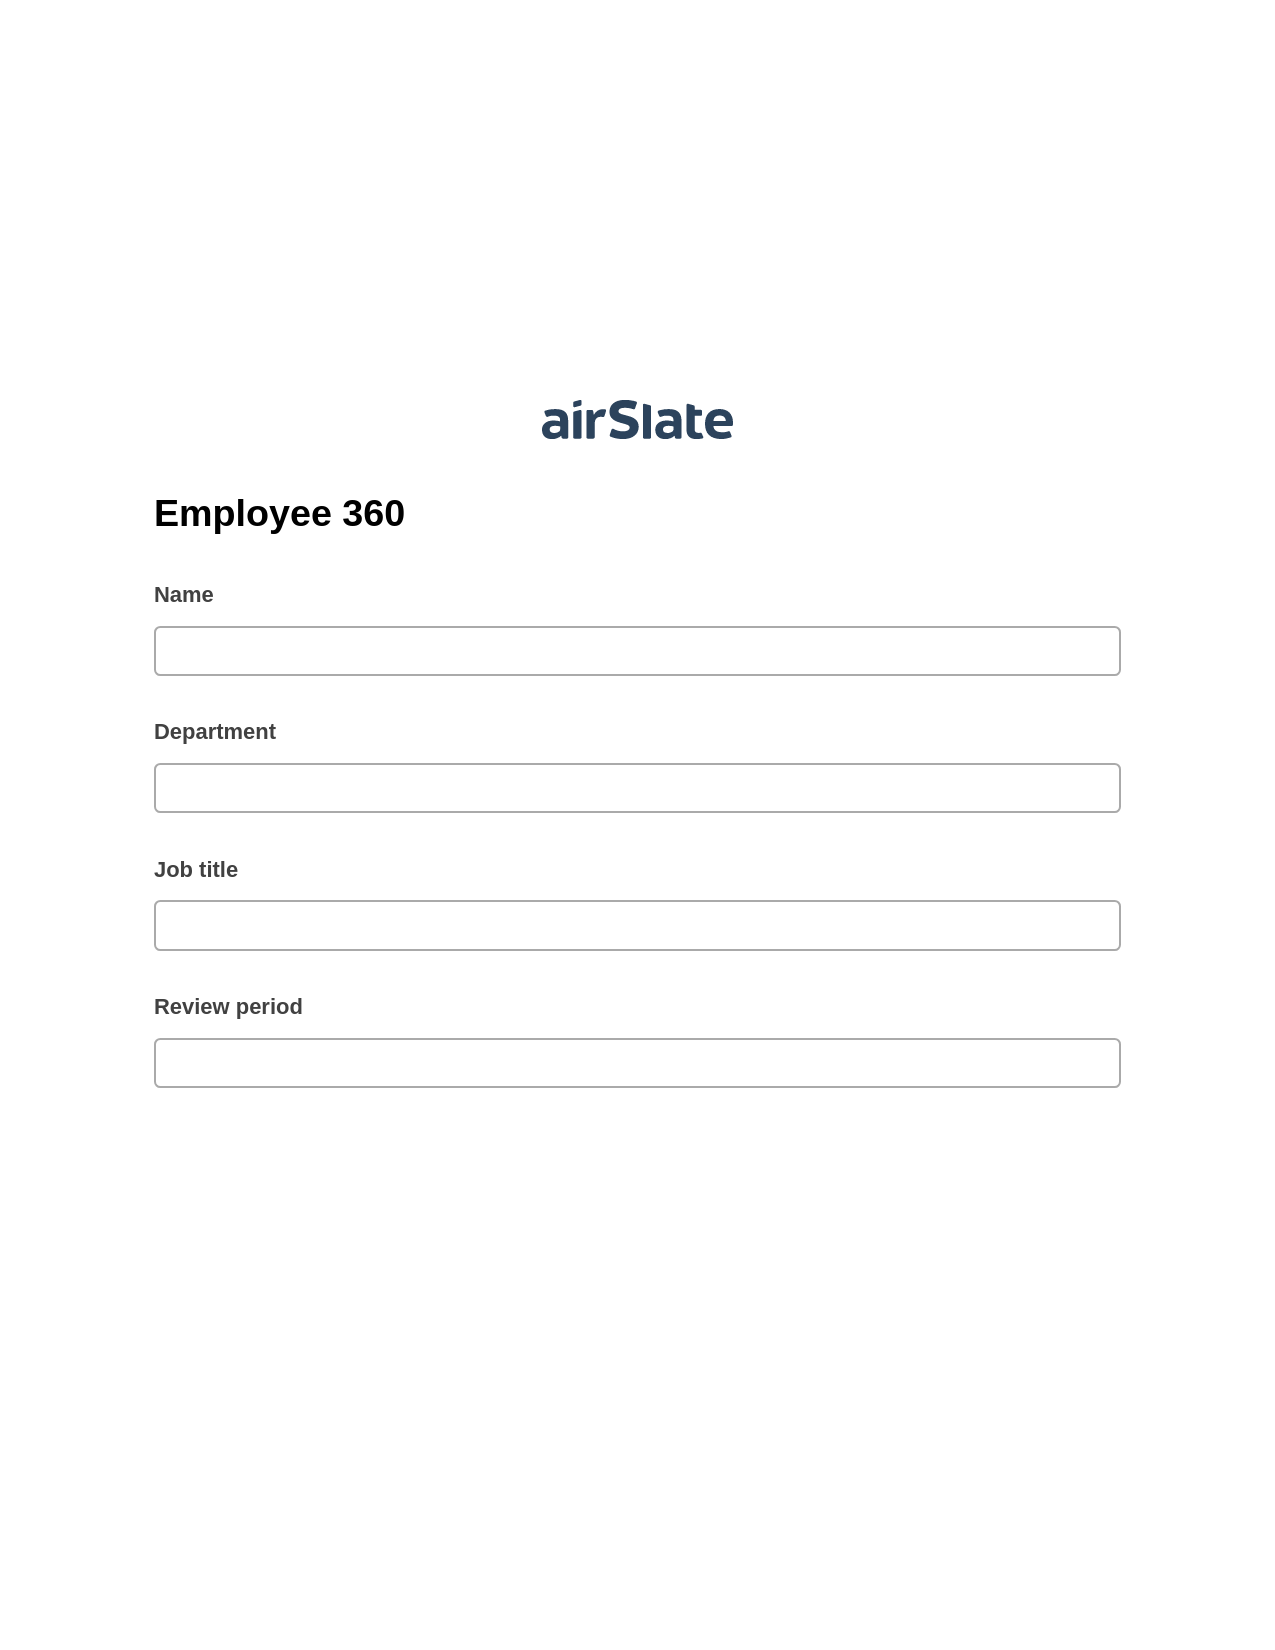 Employee 360 Pre-fill from another Slate Bot, Update MS Dynamics 365 Record Bot, Export to Salesforce Record Bot